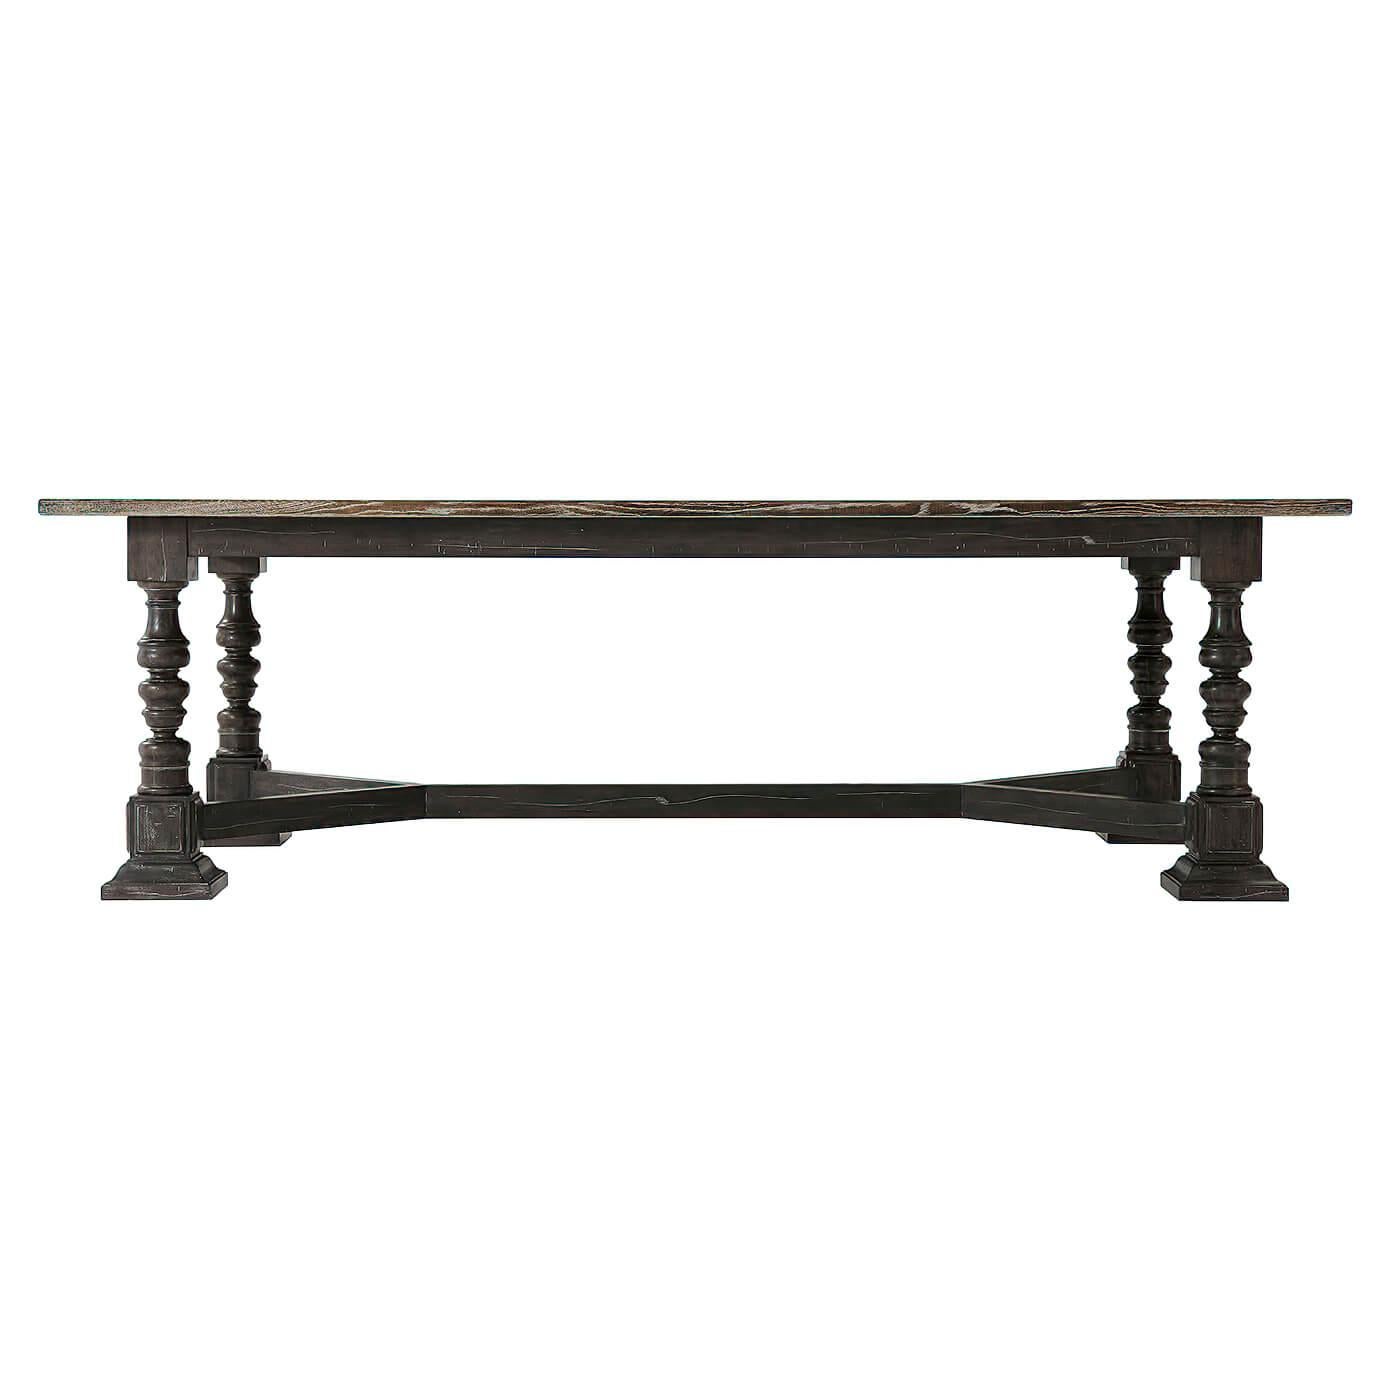 A rustic provincial Oak rectangular dining table with a cerused caramel antiqued finish on turned legs with pedestal bases and joined by a stretcher. Comfortably seats 8.

Dimensions: 96